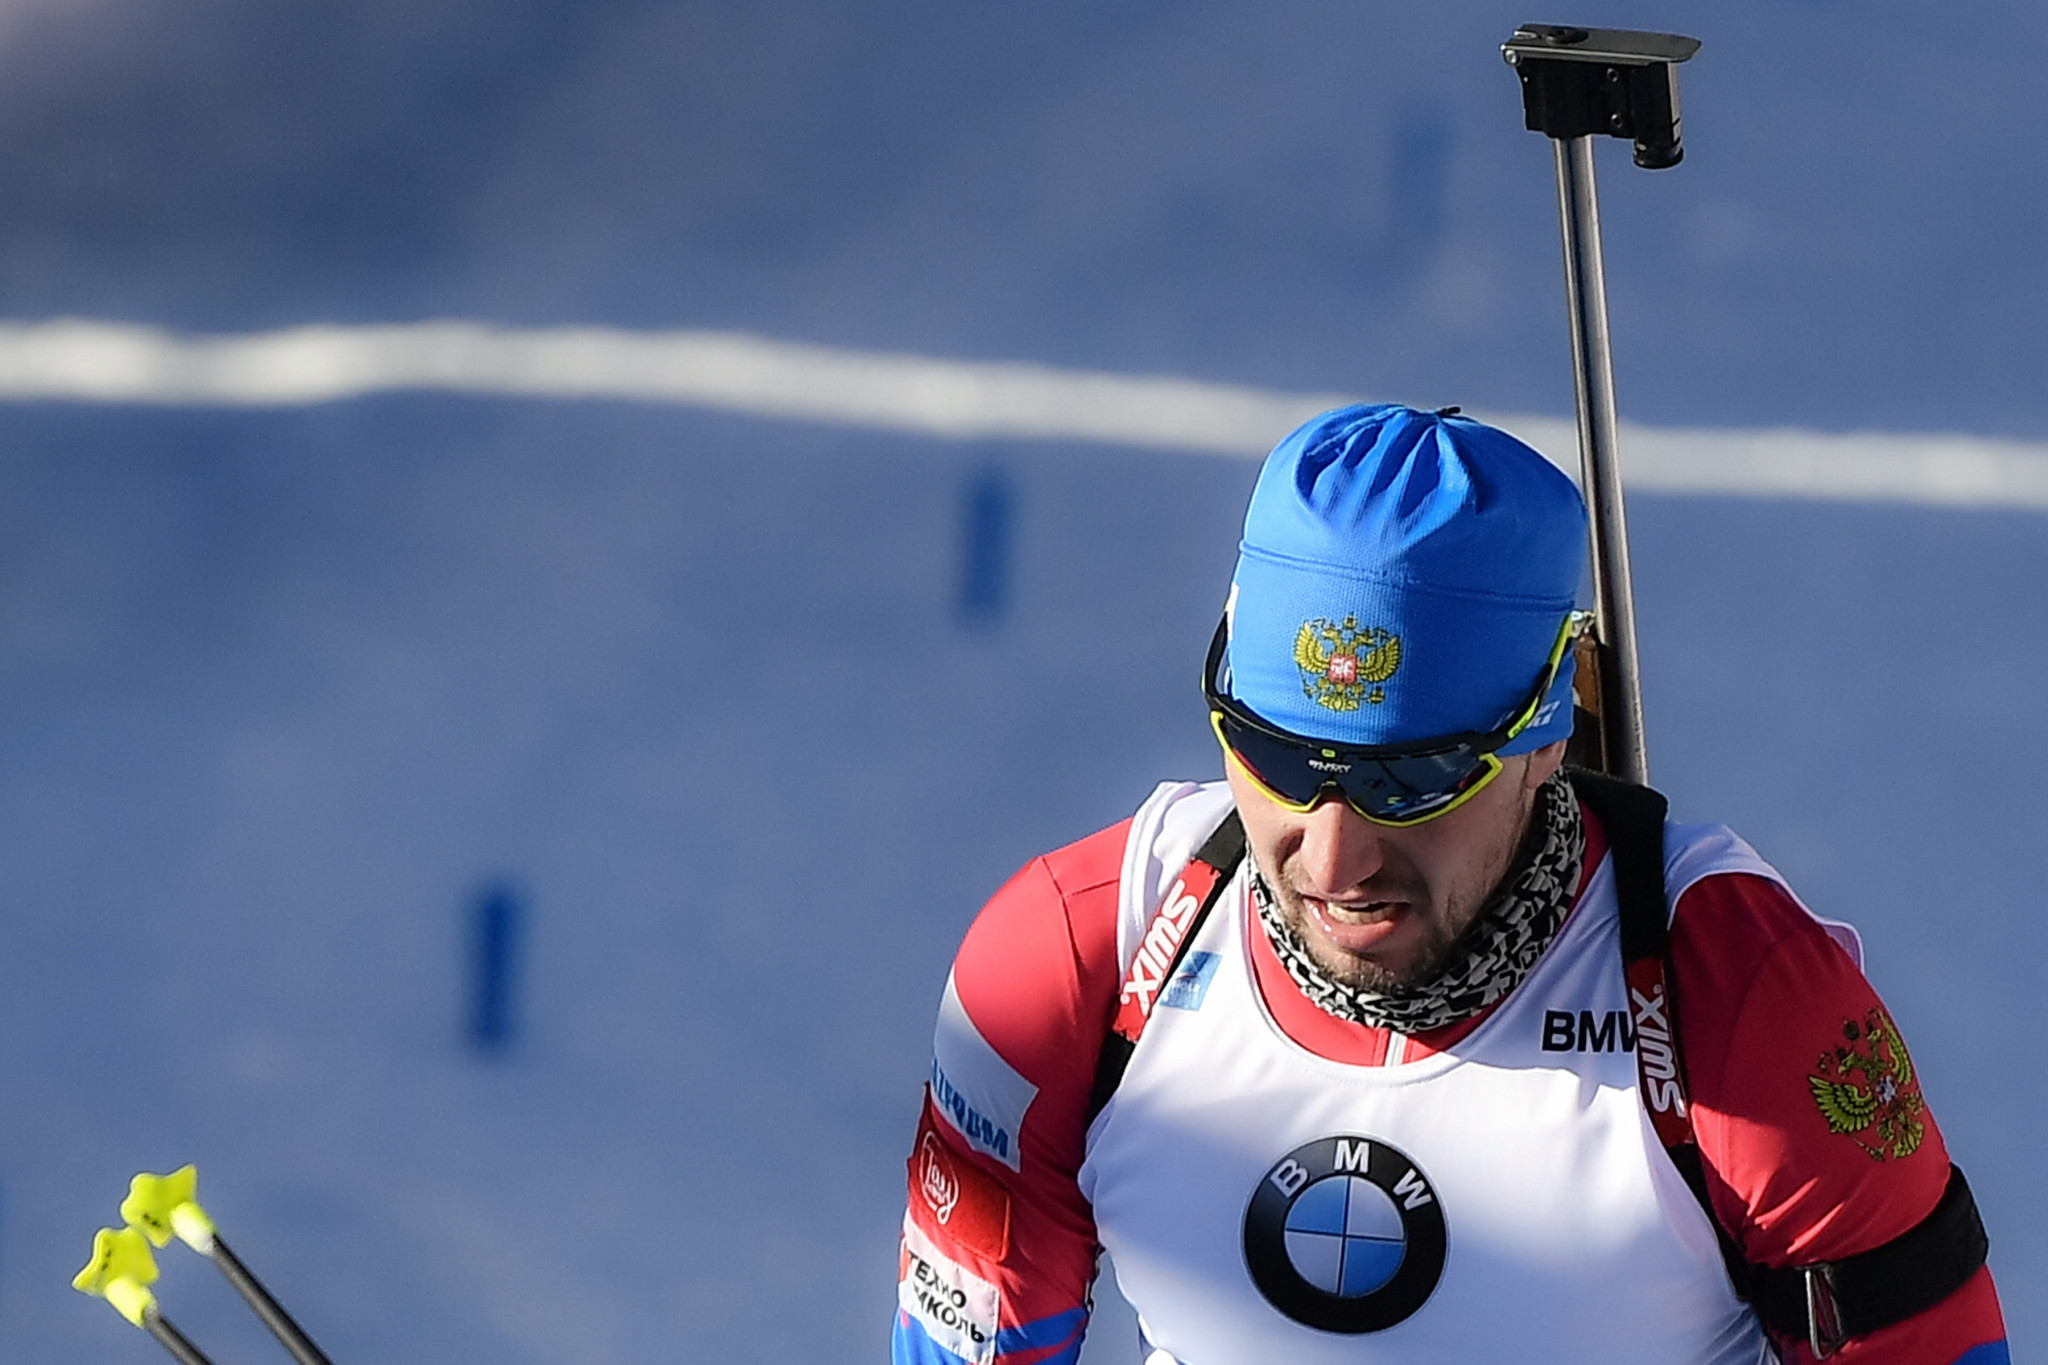 Alexander Loginov's hotel room was searched by Italian police during the Biathlon World Championships ©Getty Images